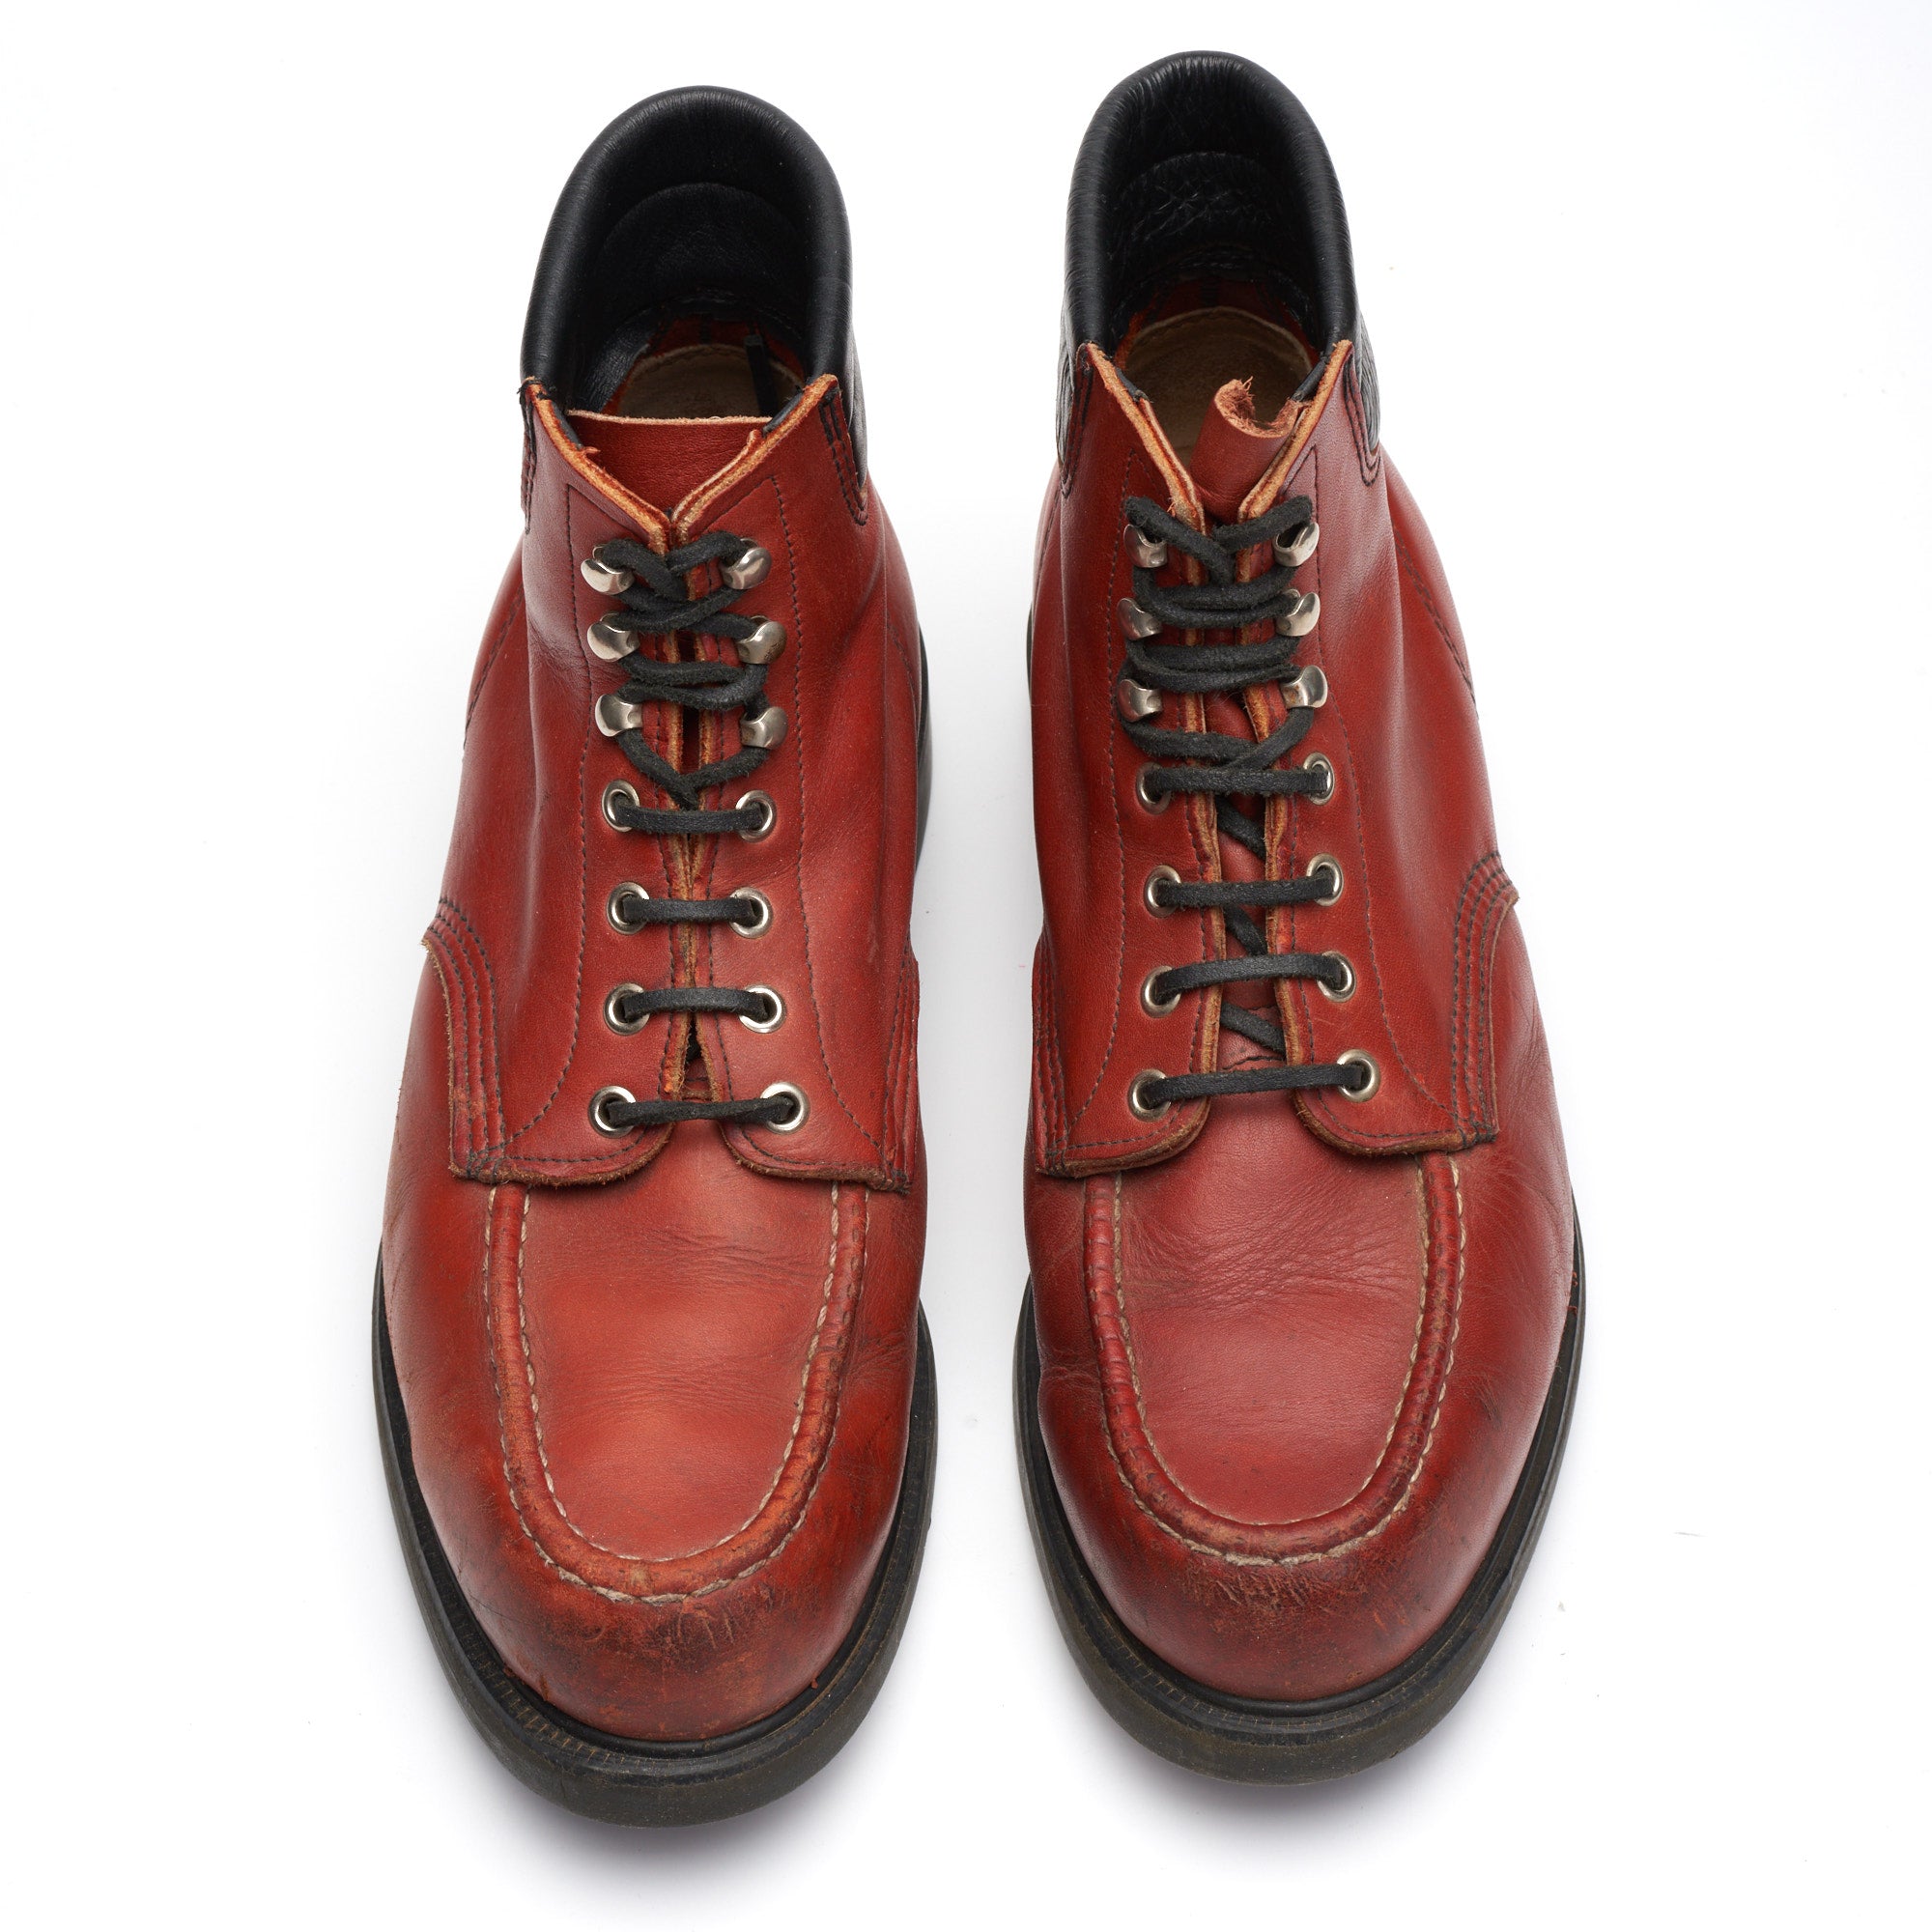 Rare Vintage RED WING Style 202 Moc Toe SuperSole Boots US 10 RED WING SHOES